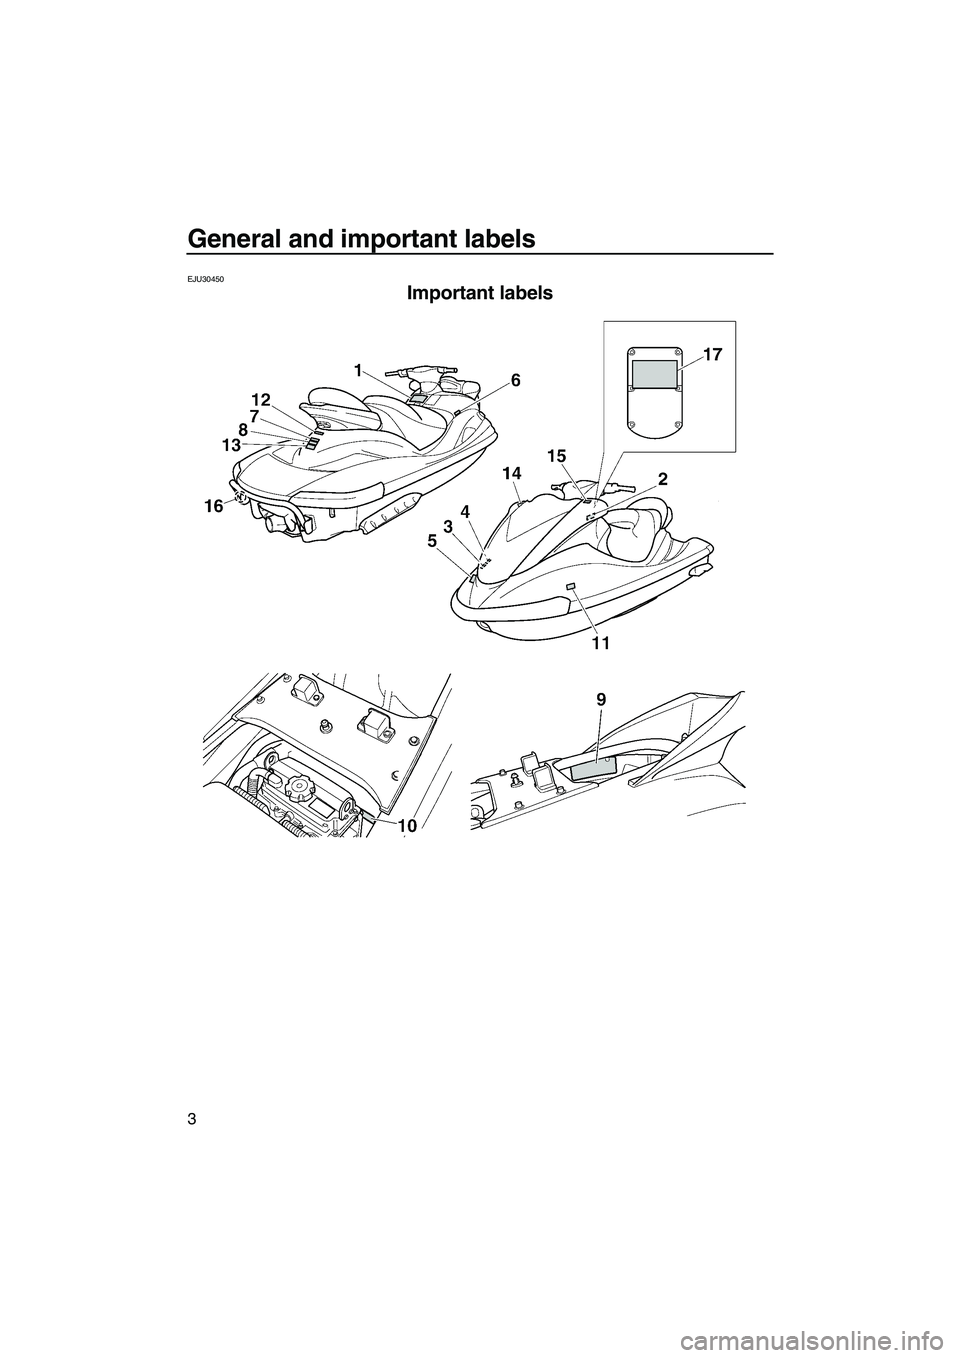 YAMAHA FX HO 2007  Owners Manual General and important labels
3
EJU30450
Important labels 
UF1X71E0.book  Page 3  Tuesday, September 26, 2006  9:52 AM 